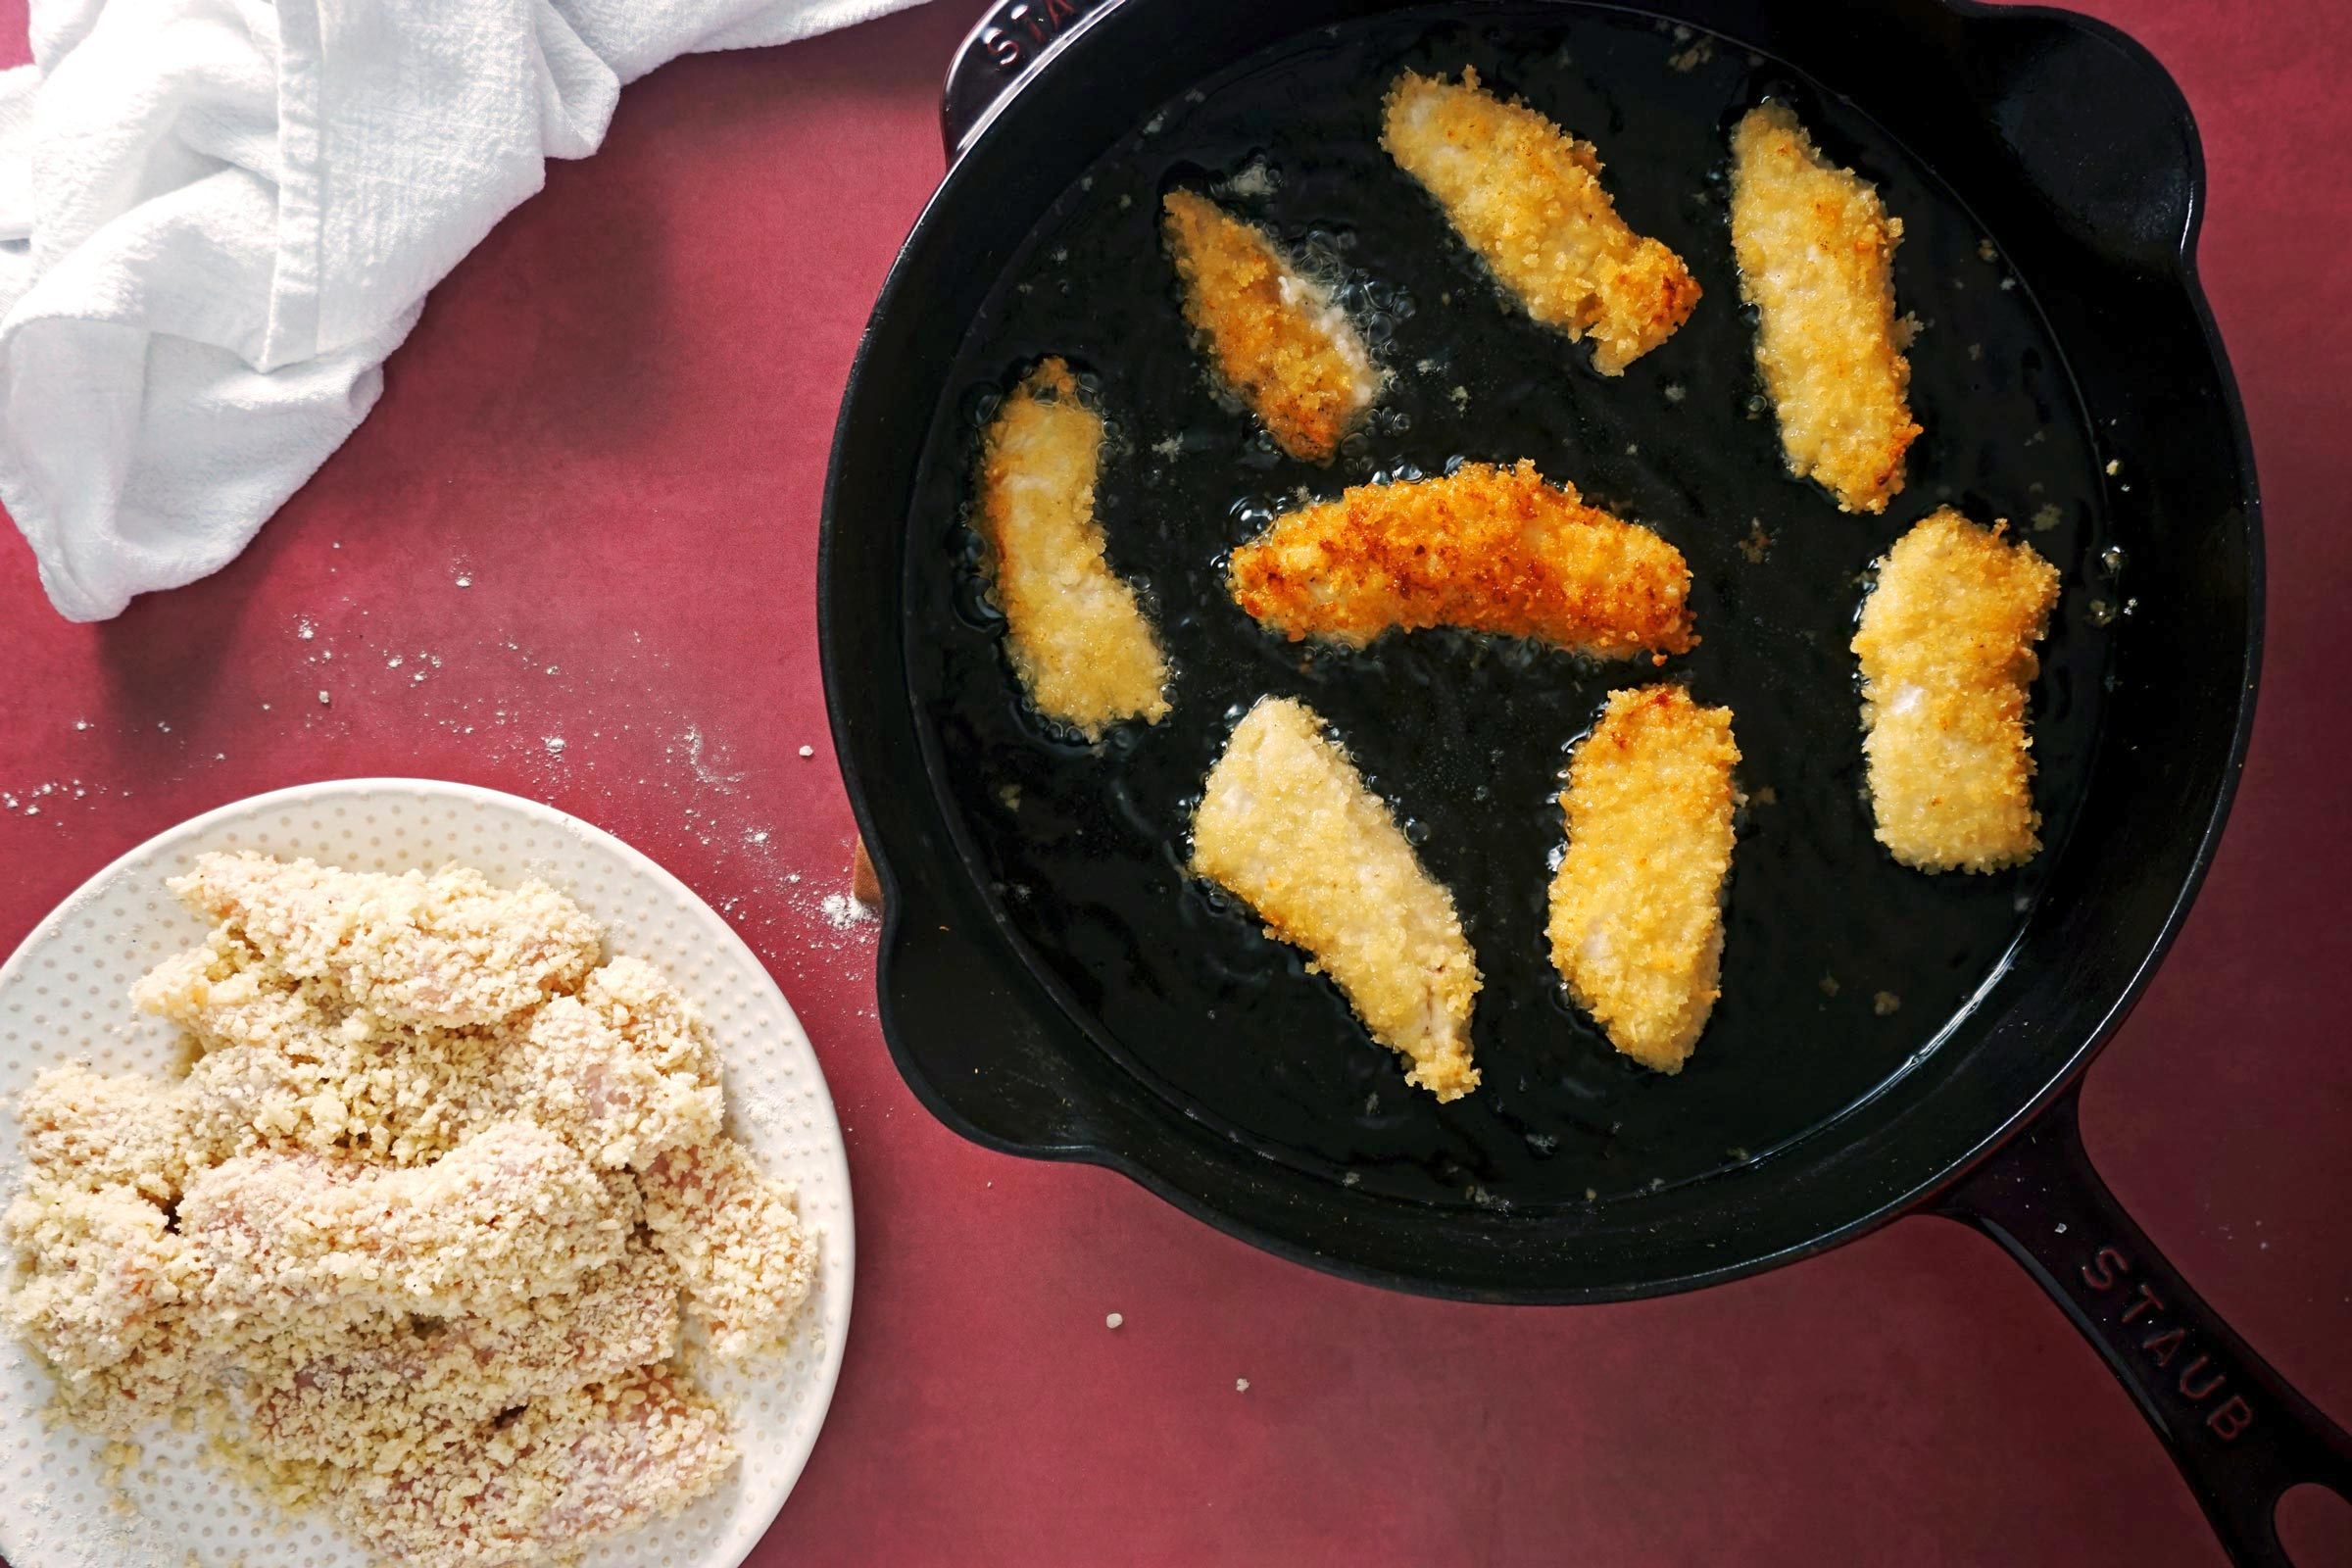 frying chicken in a cast iron pan with a plate of uncooked breaded chicken off to the side